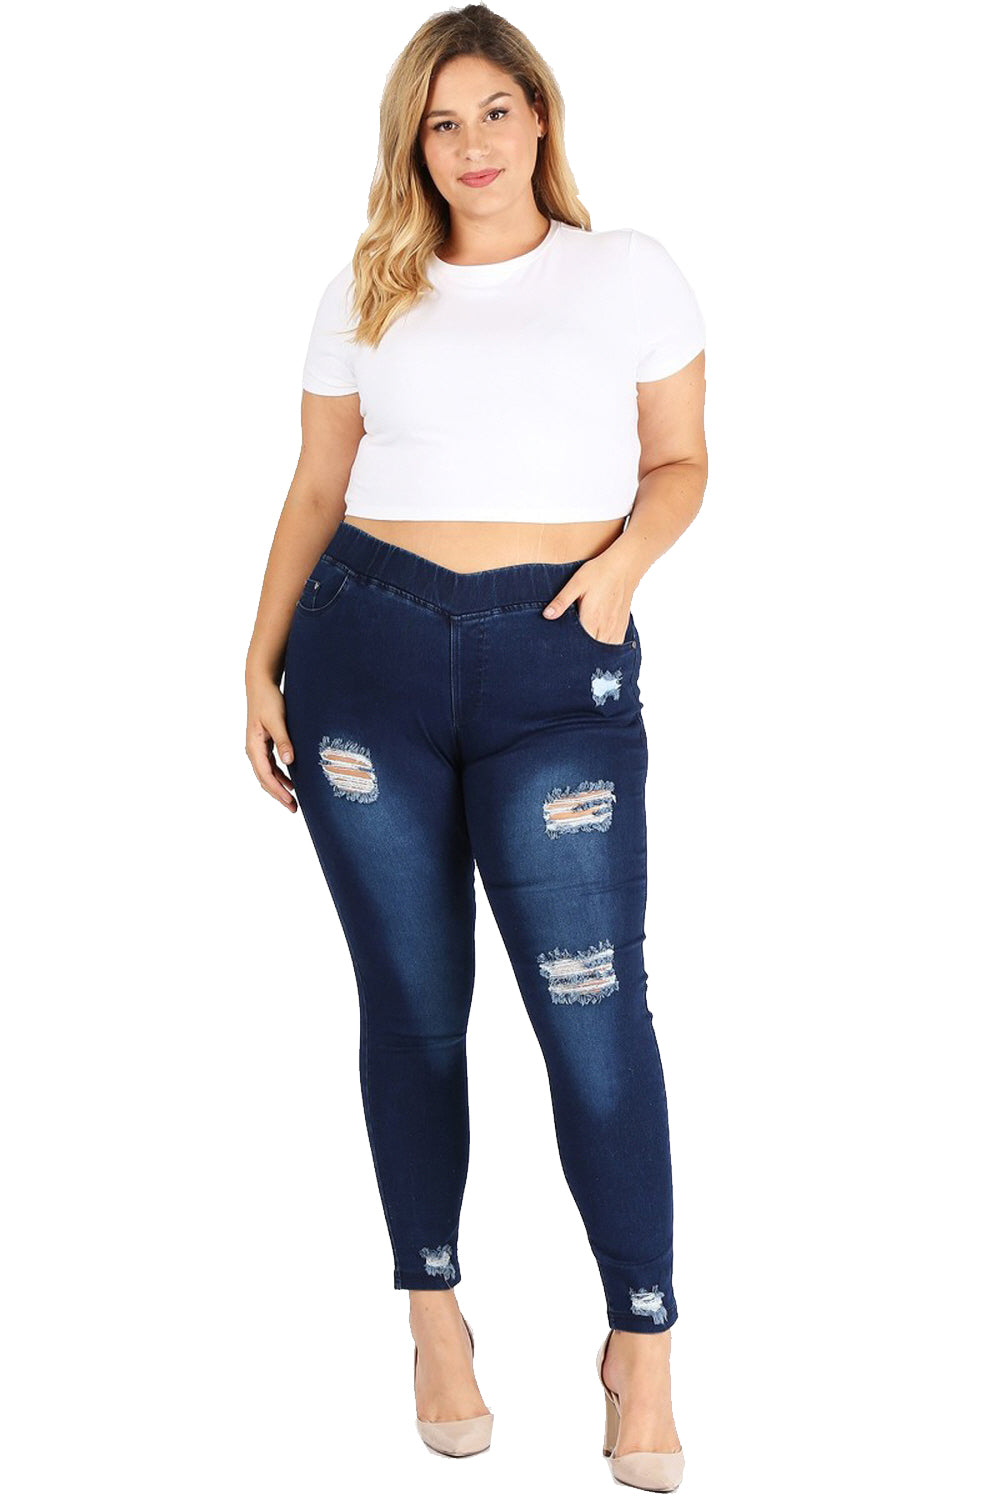 jeggings and jeans